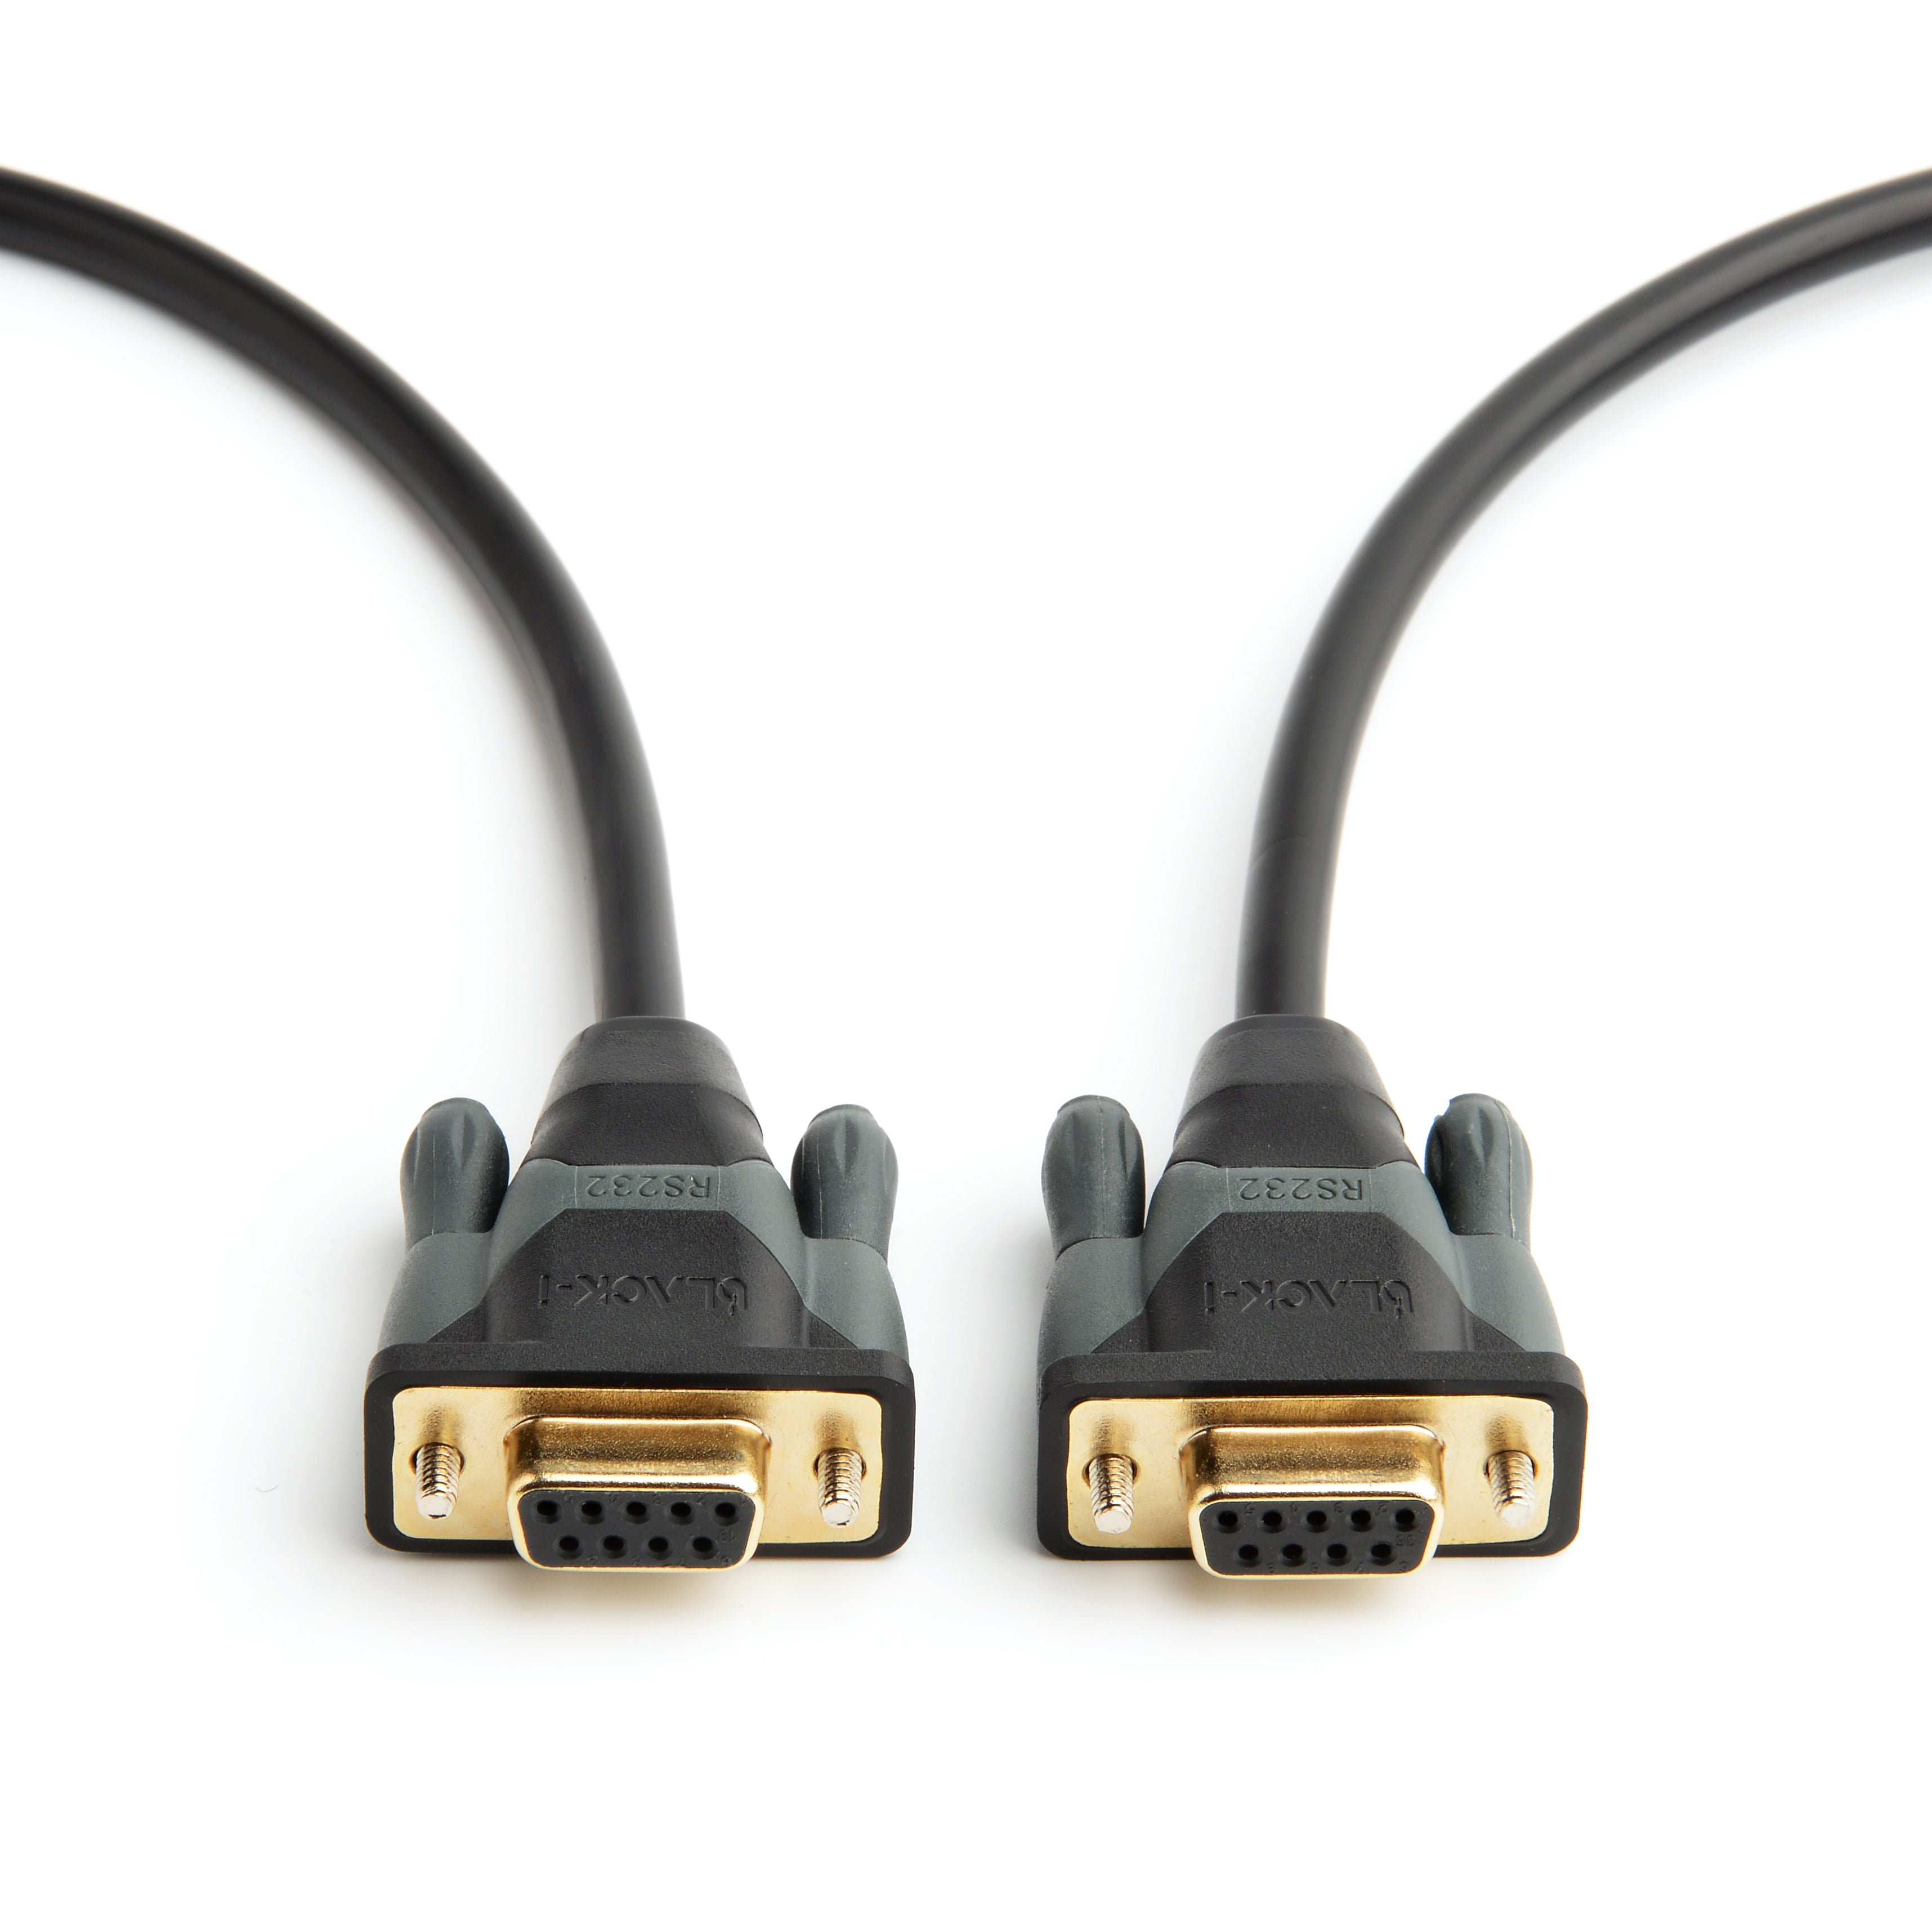 Black-i 9 Pin Serial RS232 Female to Female Cross 1.8M Cable